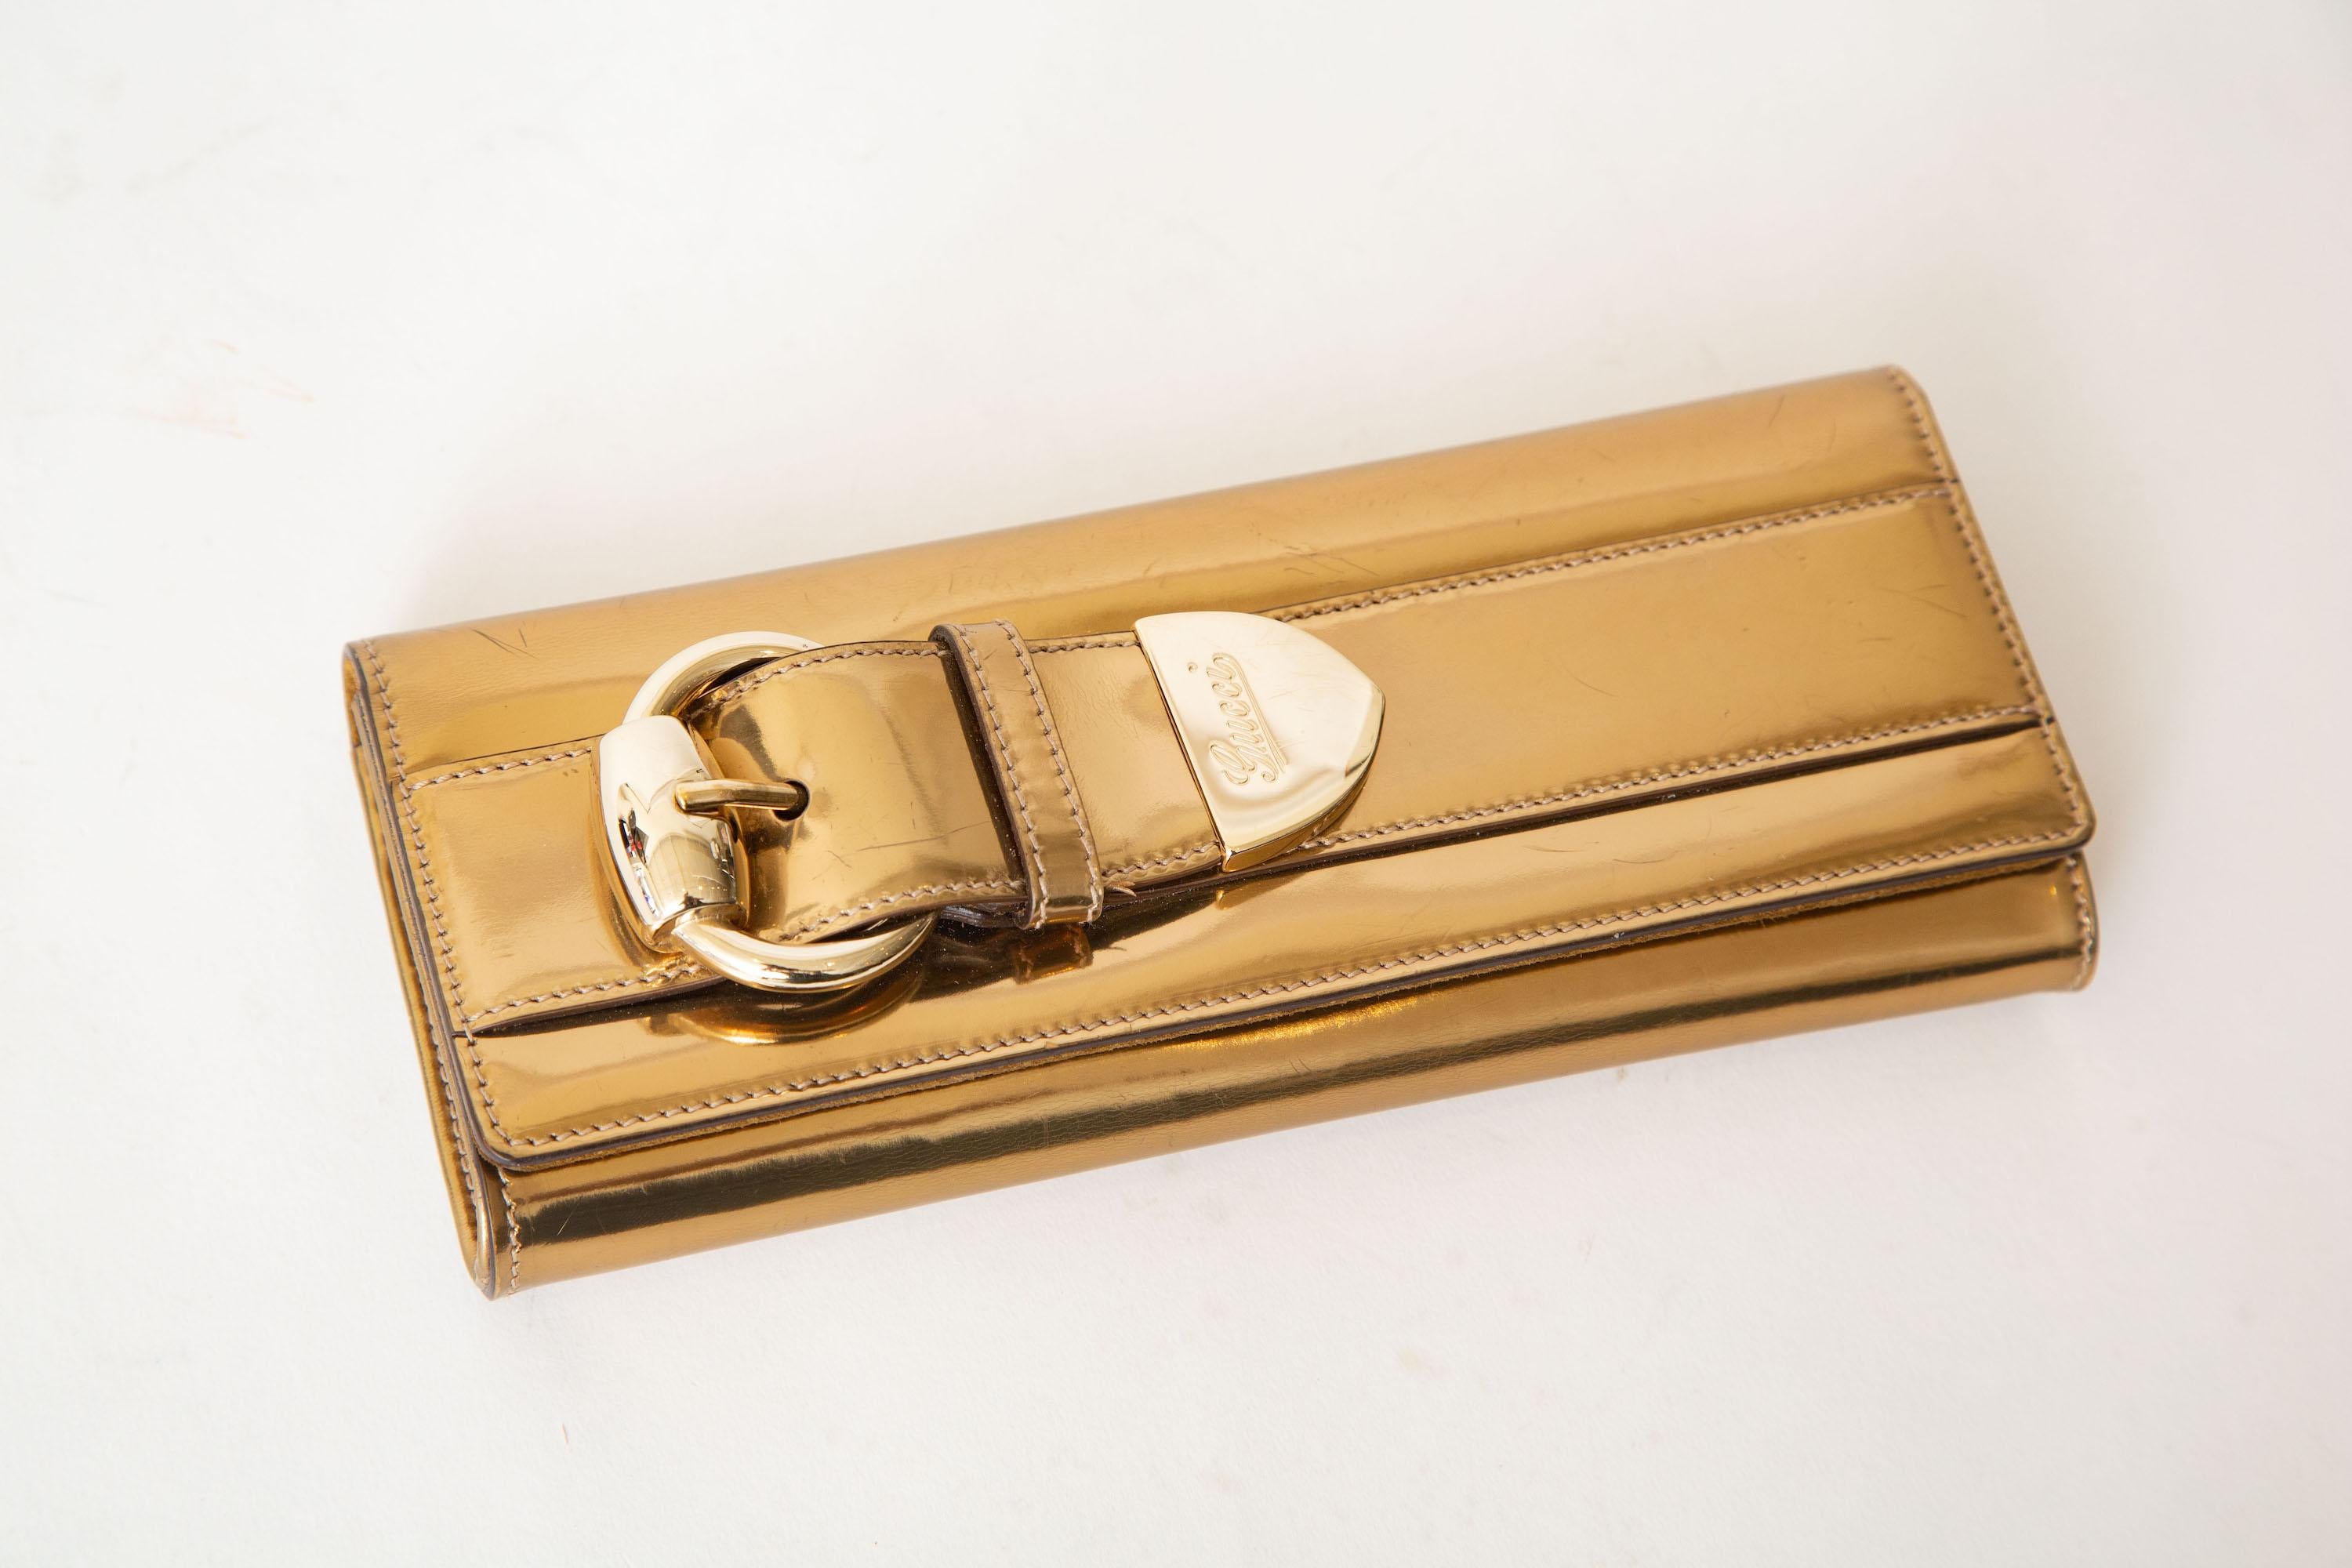 This ever so chic and slim Italian Gucci gold copper buckle small clutch fits an I phone 11 and Up. It is from 2000. It was designed by Frida Giannini for Gucci. We have just had it taken to a high end shoe repair to shine up and partially remove a